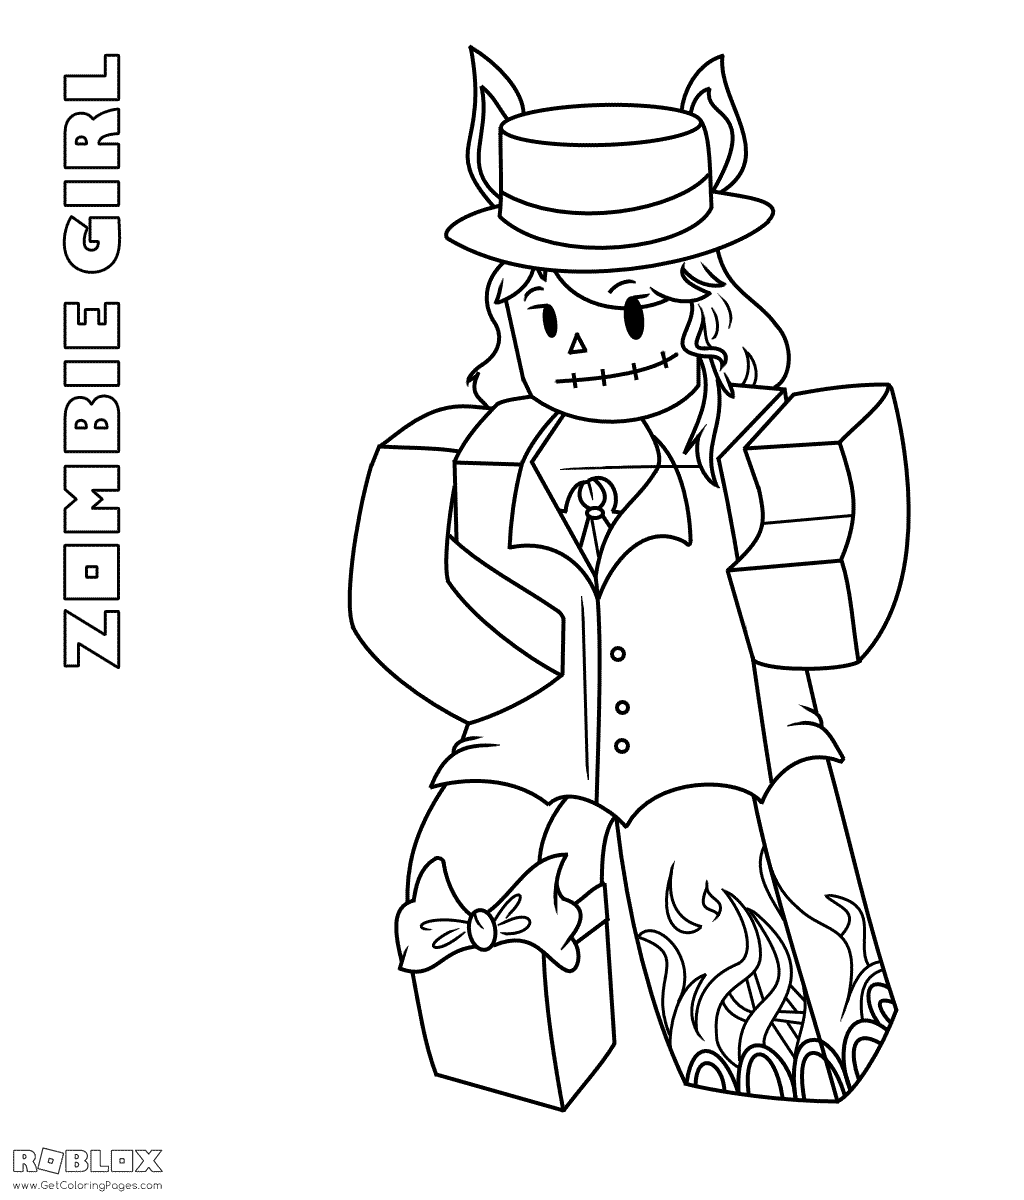 Roblox Zombie Girl Coloring Pages - Get Coloring Pages